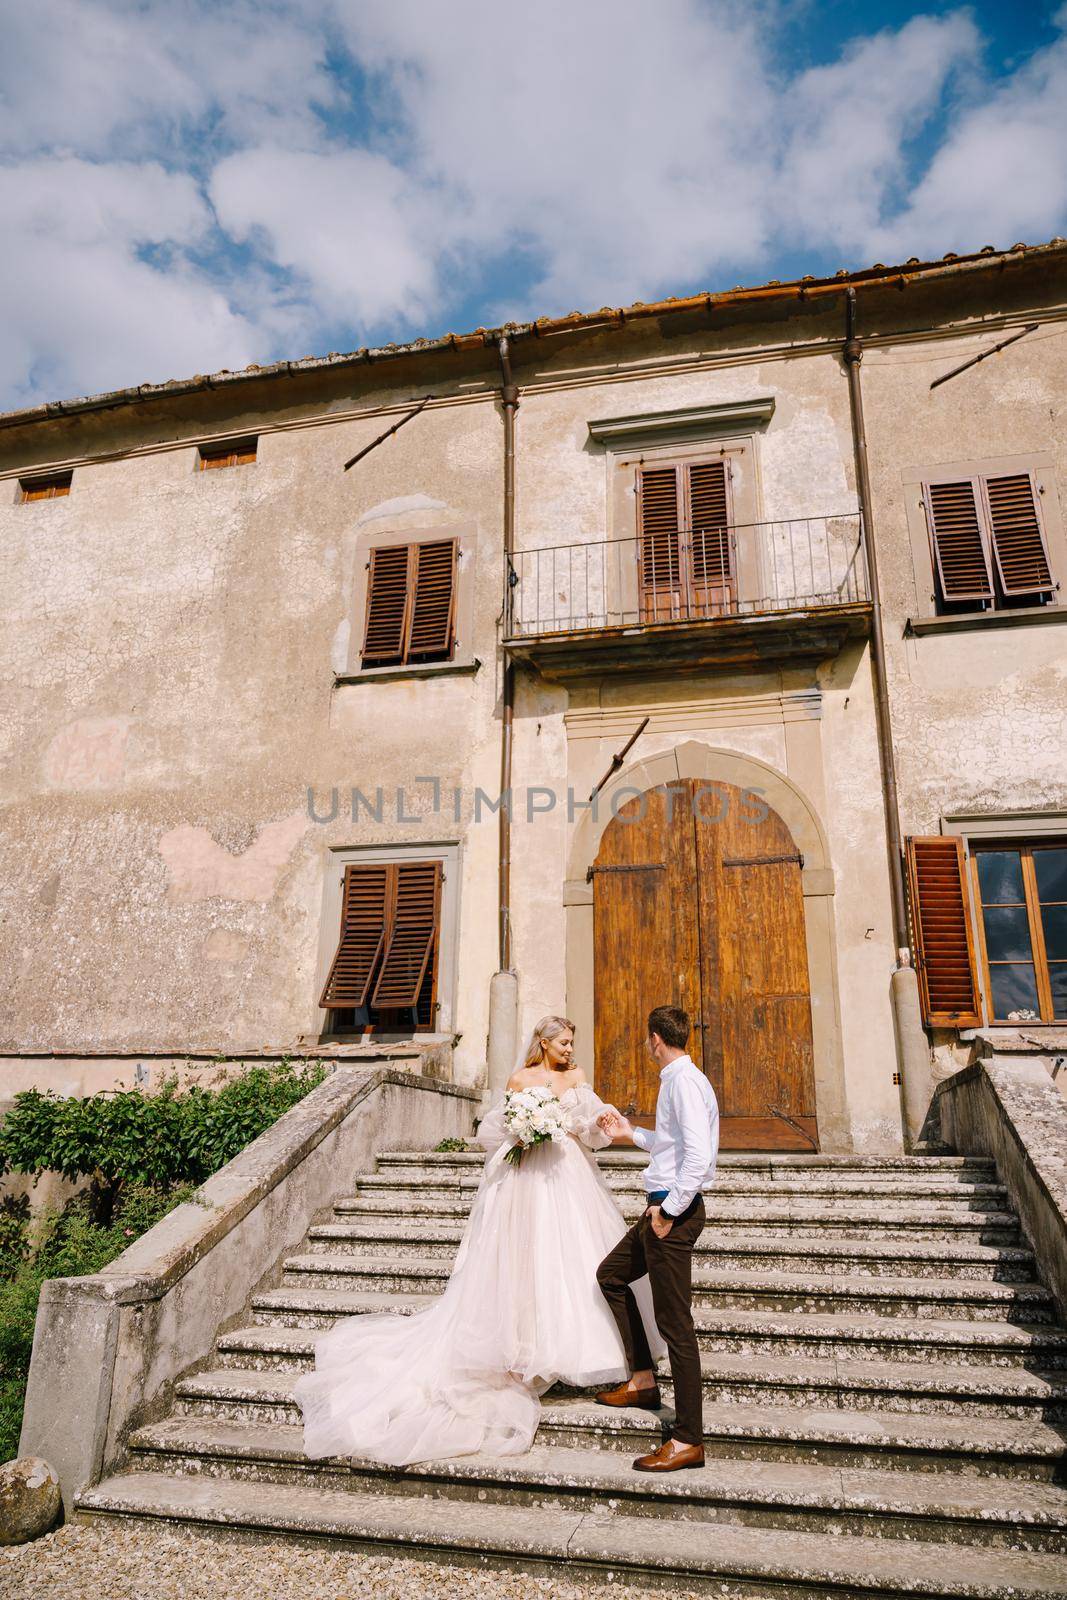 The wedding couple walks in the garden. Lovers of the bride and groom. Wedding in Florence, Italy, in an old villa-winery.